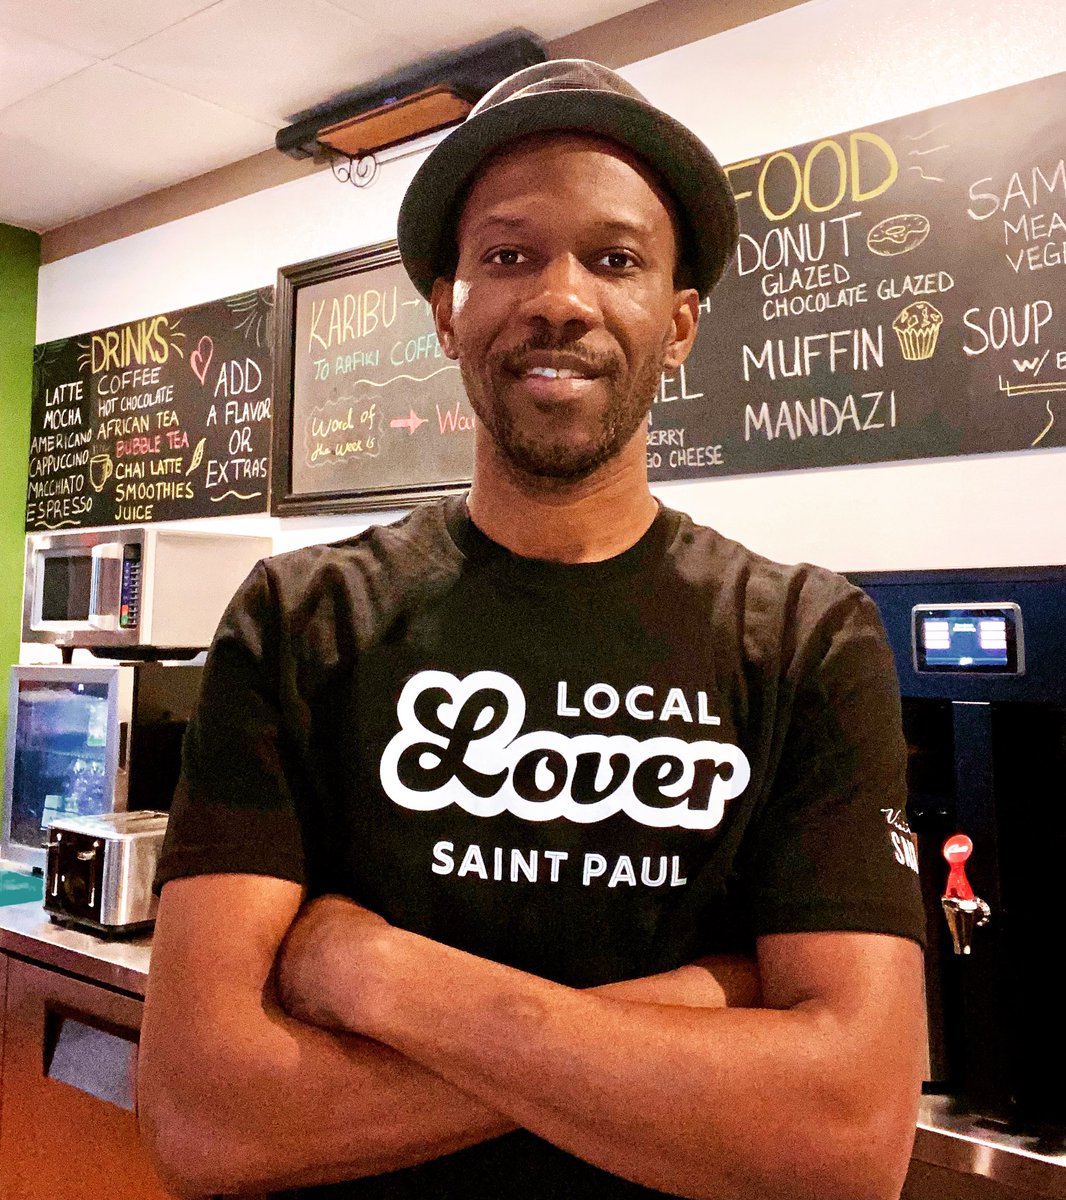 Saint Paul proud and strong 💪🏾 🗣️👏🏽

Come for the delicious coffee, stay for the community, friendship, and ambience! 

@SaintPaul @cityofsaintpaul 

#MyStPaul #LocalLover #minorityownedbusiness #supportsmallbusiness #supportcommunity